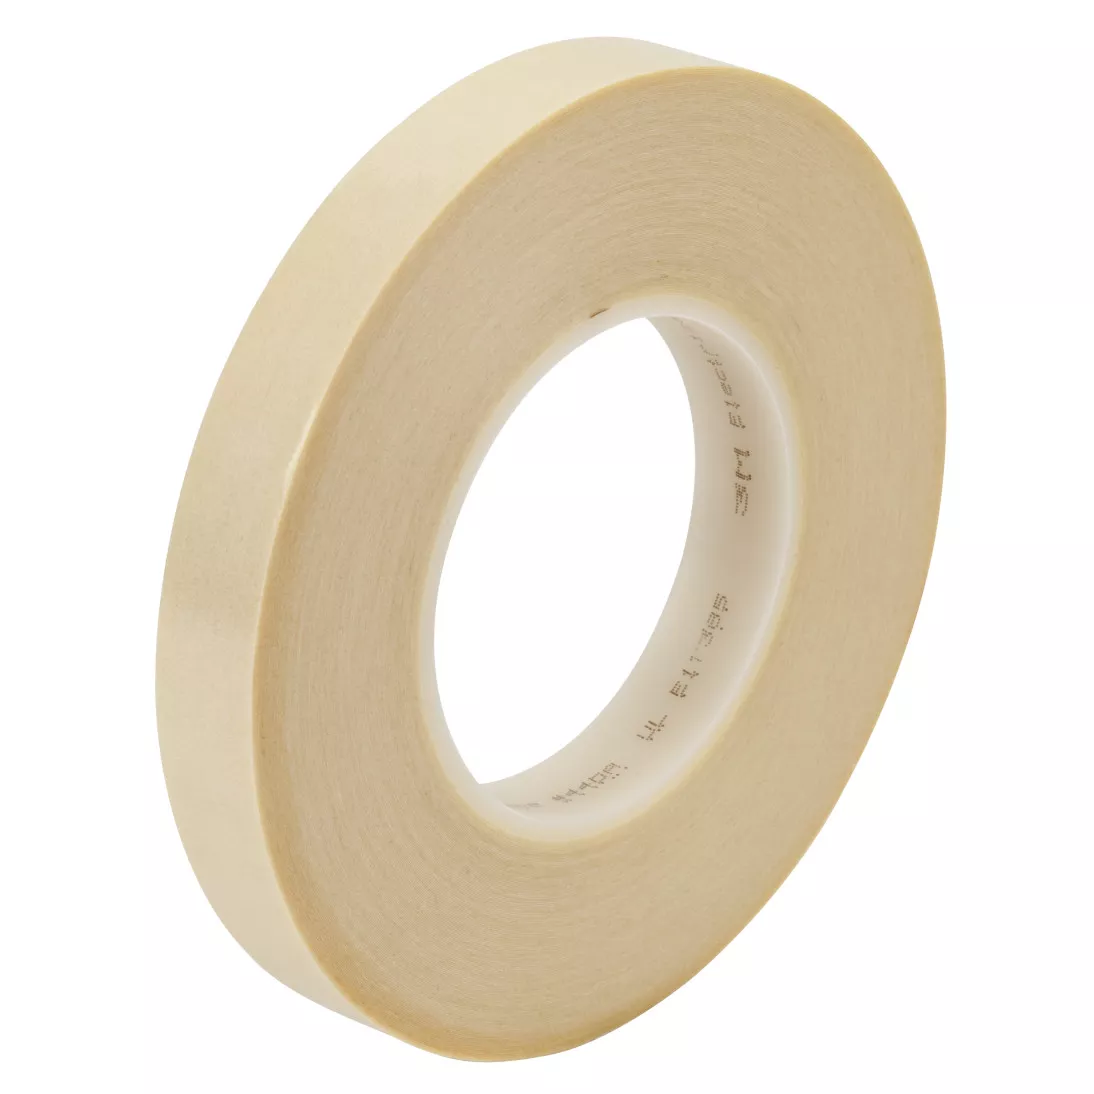 3M™ Filament-Reinforced Electrical Tape 44D-A, 46 in x 49.2 yd (45
METERS), 3-in paper core, Log roll, 1 Roll/Case